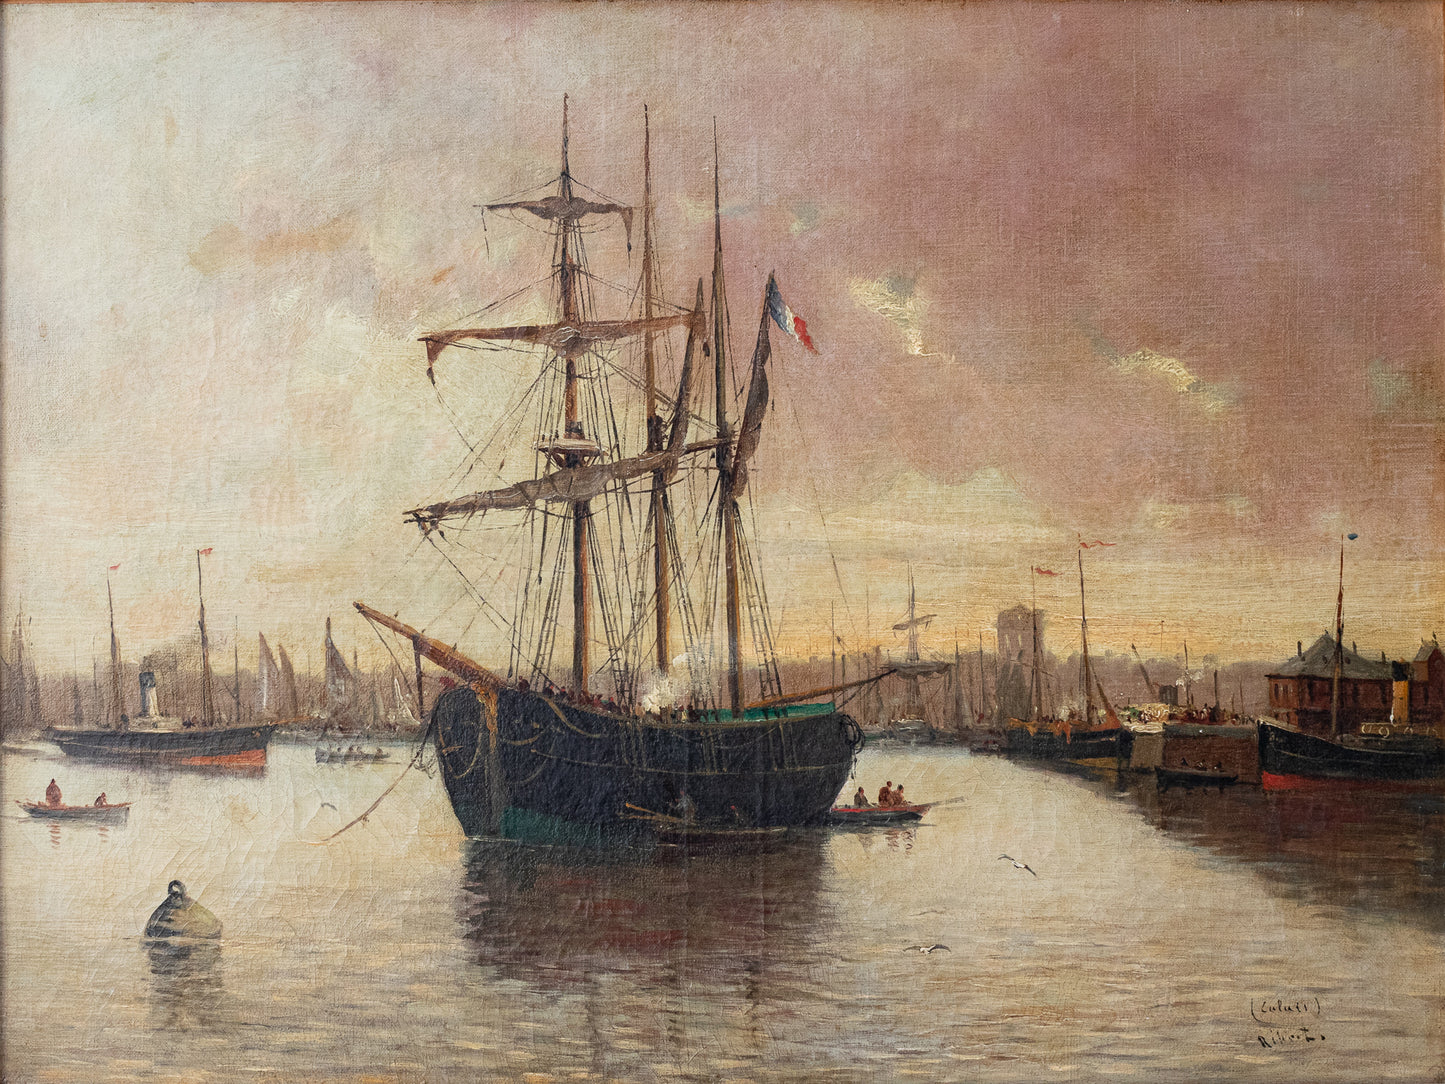 Collection of Four - 19th Century Marine Paintings  - Various Artists